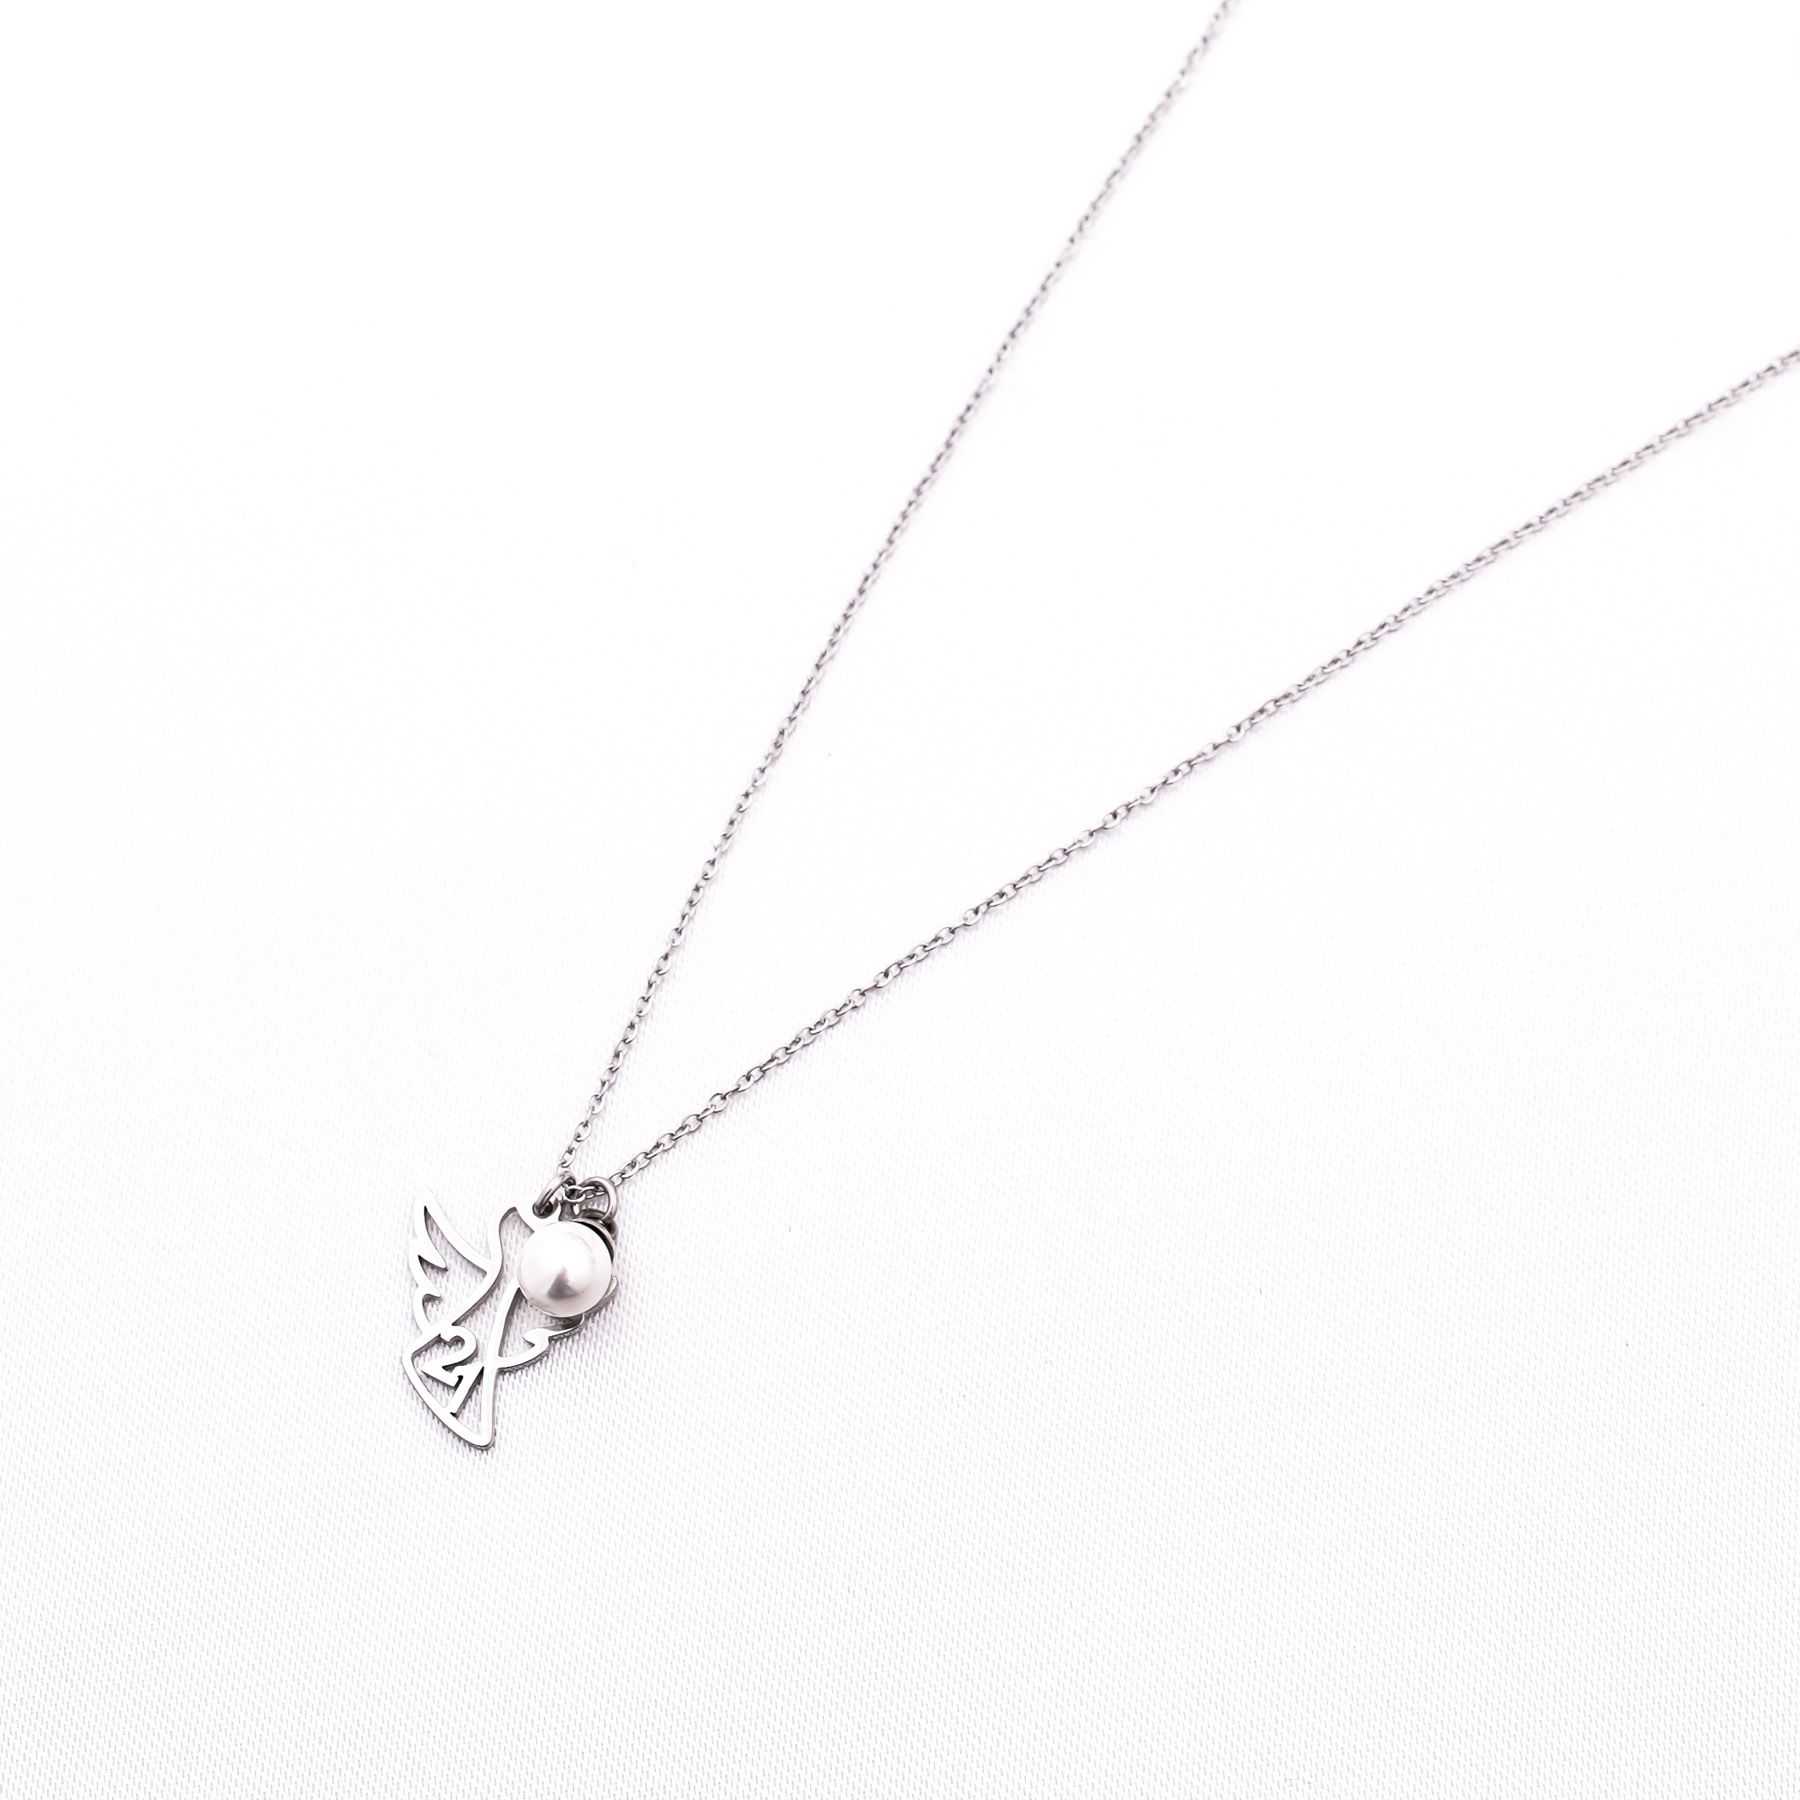 LUCKY DAY NECKLACE - SILVER